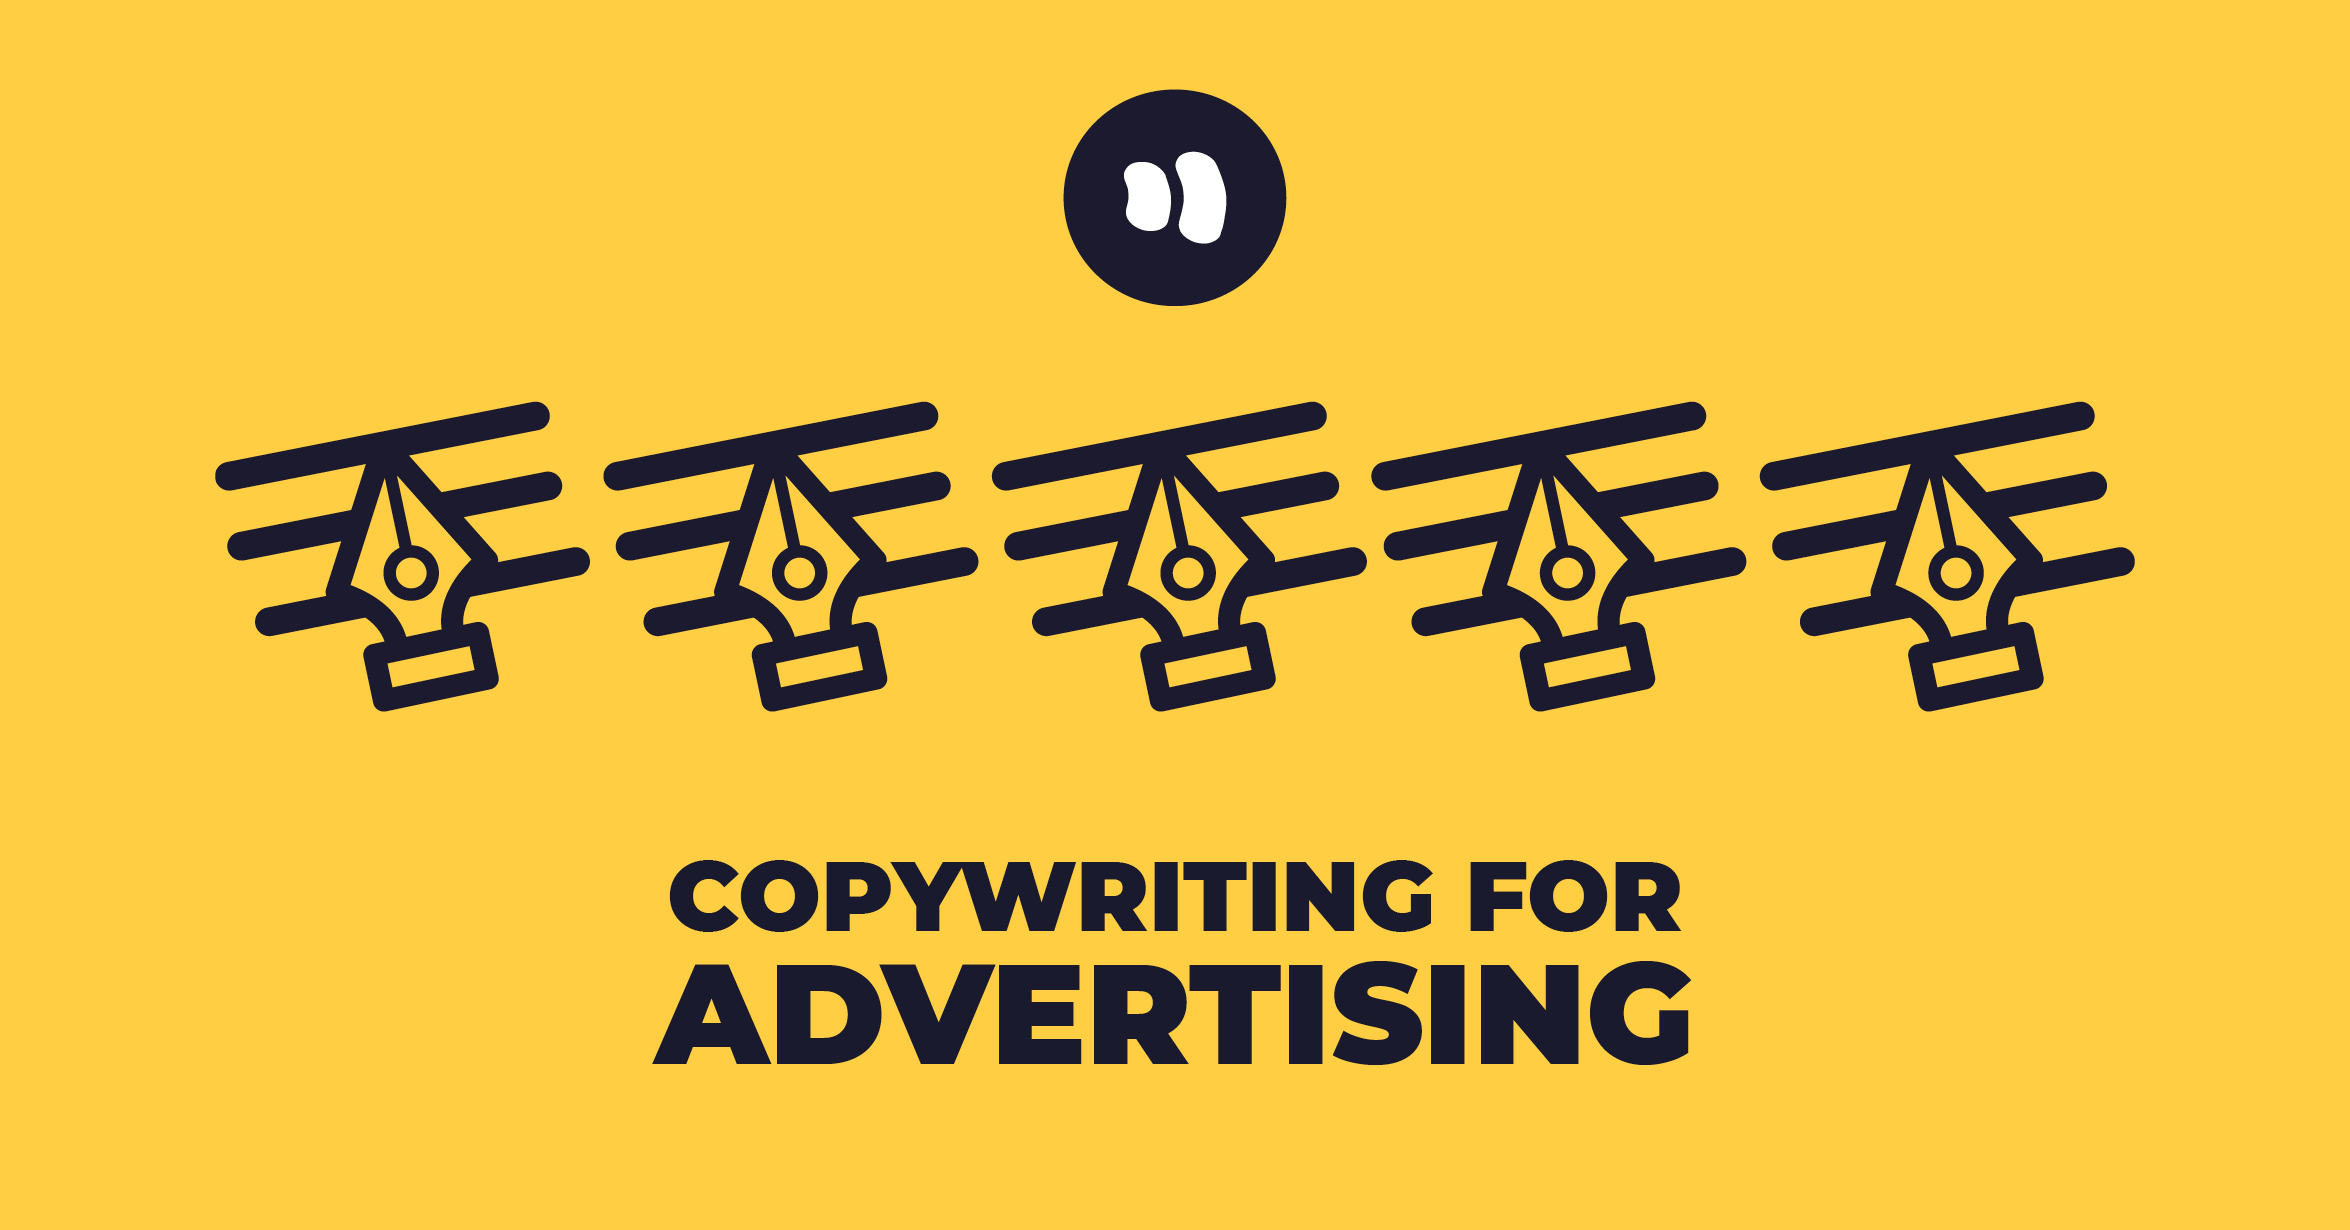 Copywriting for Advertising: 5 Secrets from the Experts!